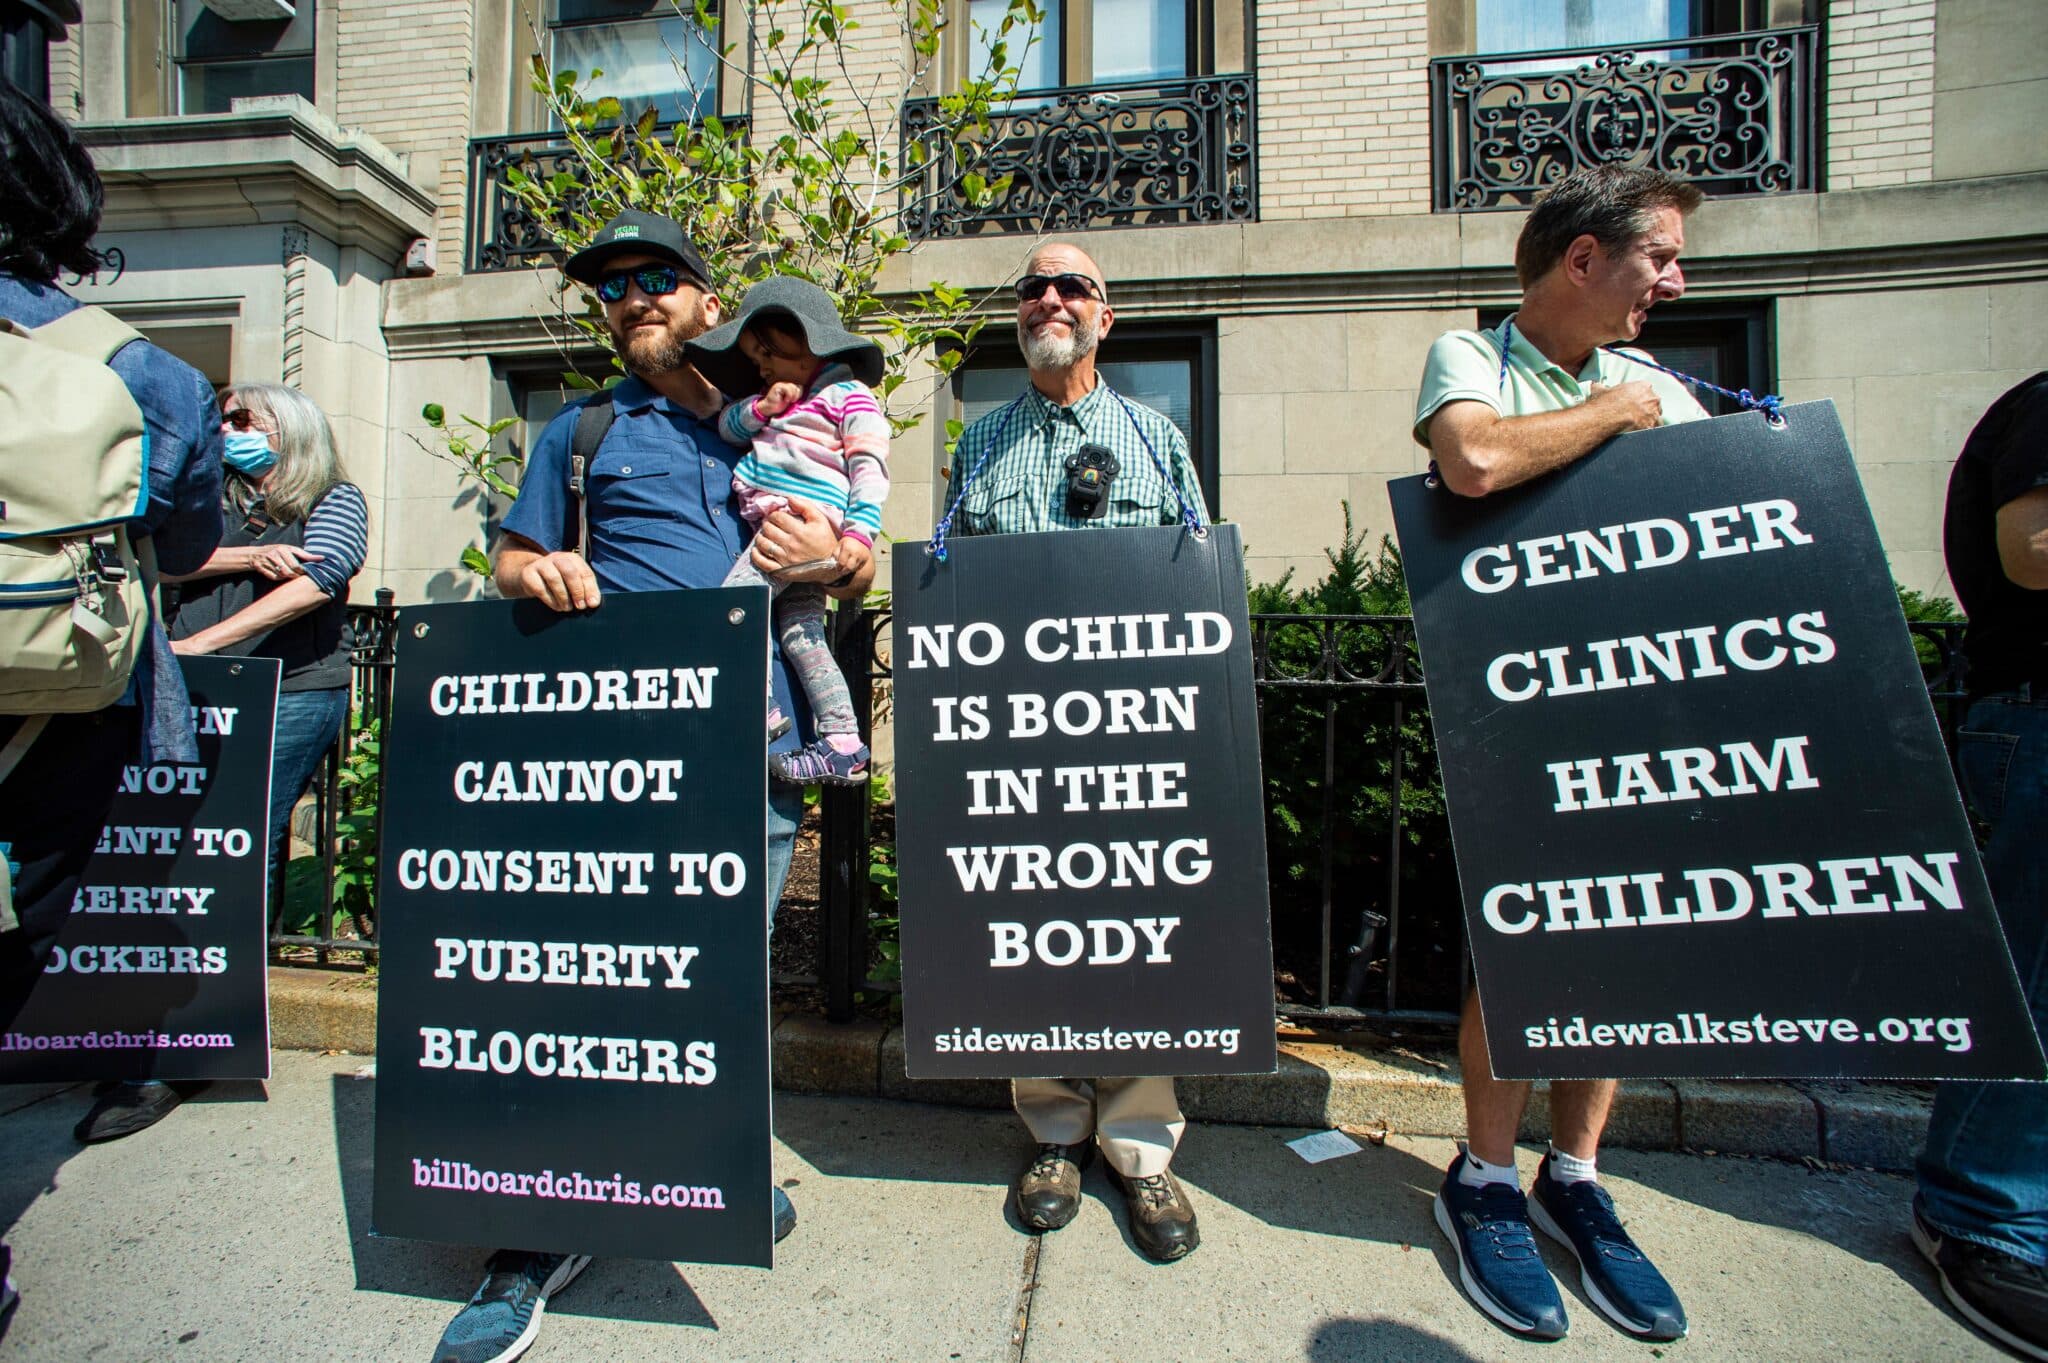 Supporters of anti-trans activist Chris Elston demonstrate against gender affirmation treatments and surgeries on minors, outside of Boston Childrens Hospital. 